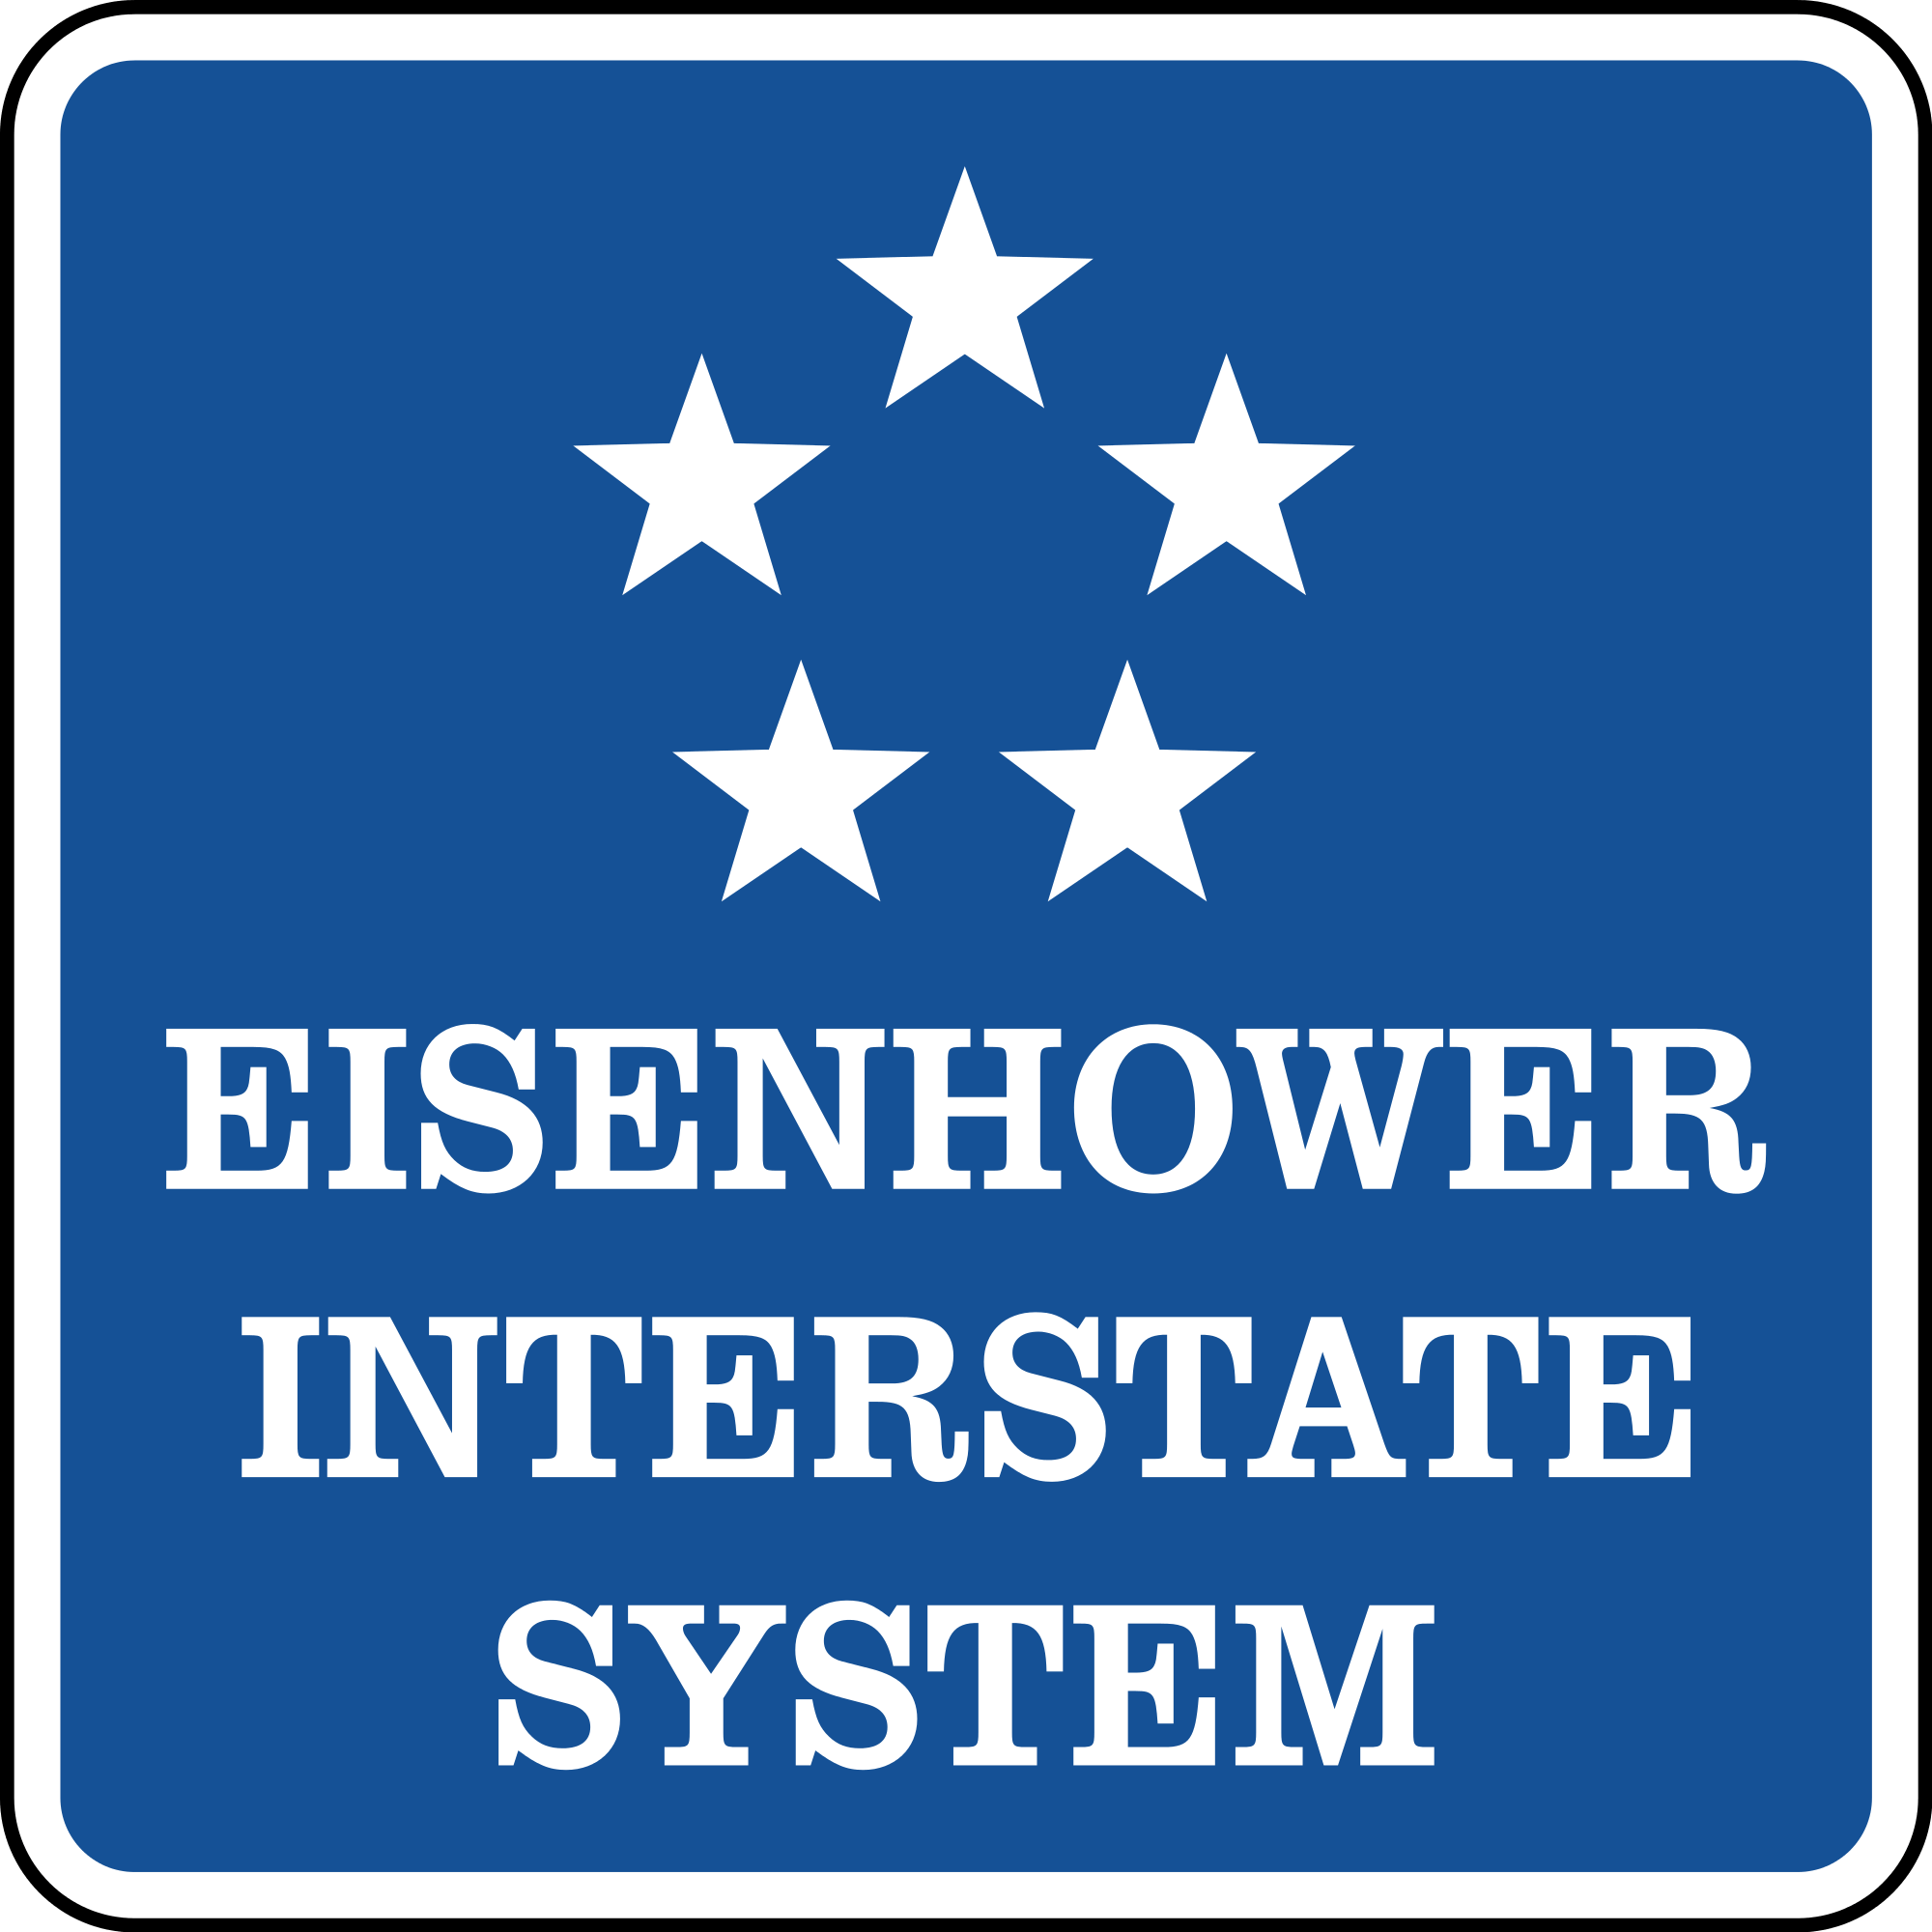 M1-10a Eisenhower Interstate System Guide Sign